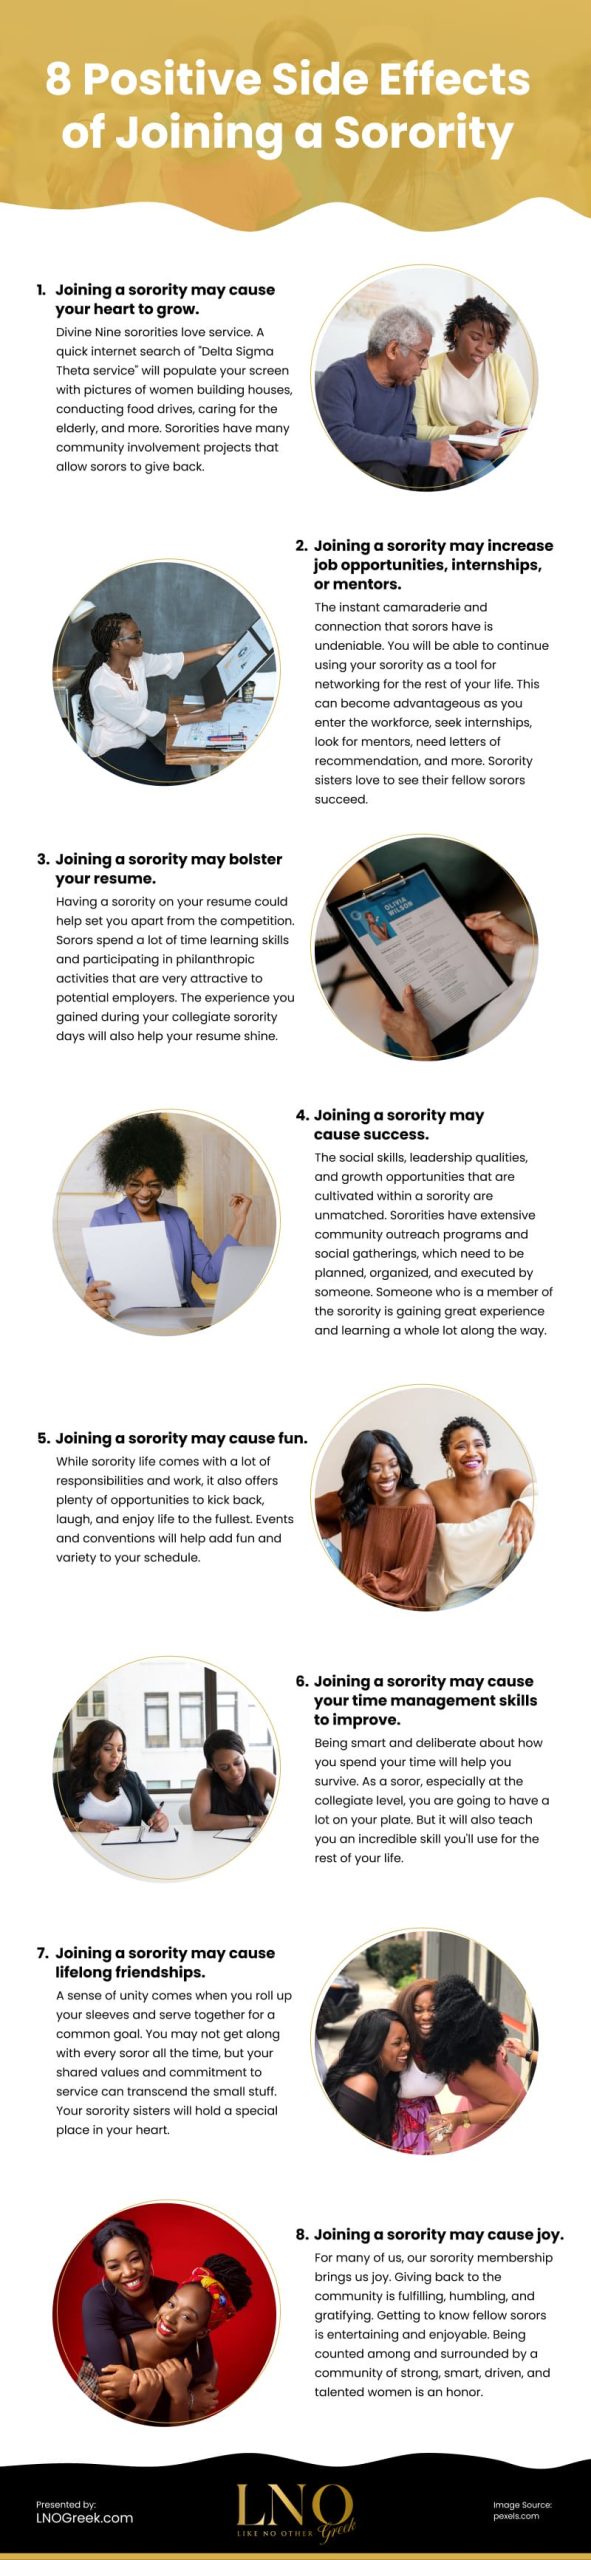 8 Positive Side Effects of Joining a Sorority Infographic